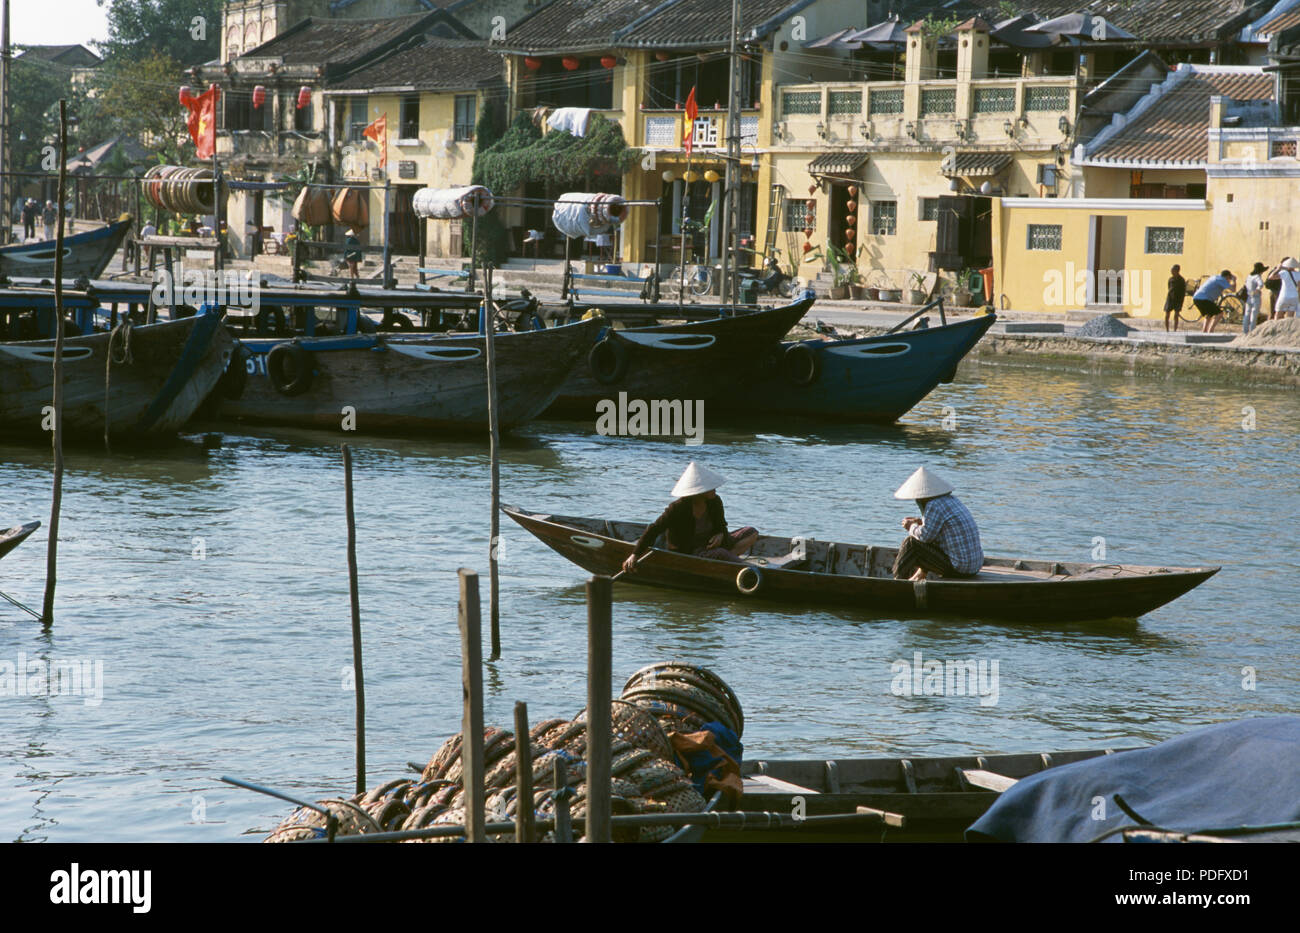 River traffic on the Thu Bhon river at Hoi An, Vietnam         FOR EDITORIAL USE ONLY Stock Photo